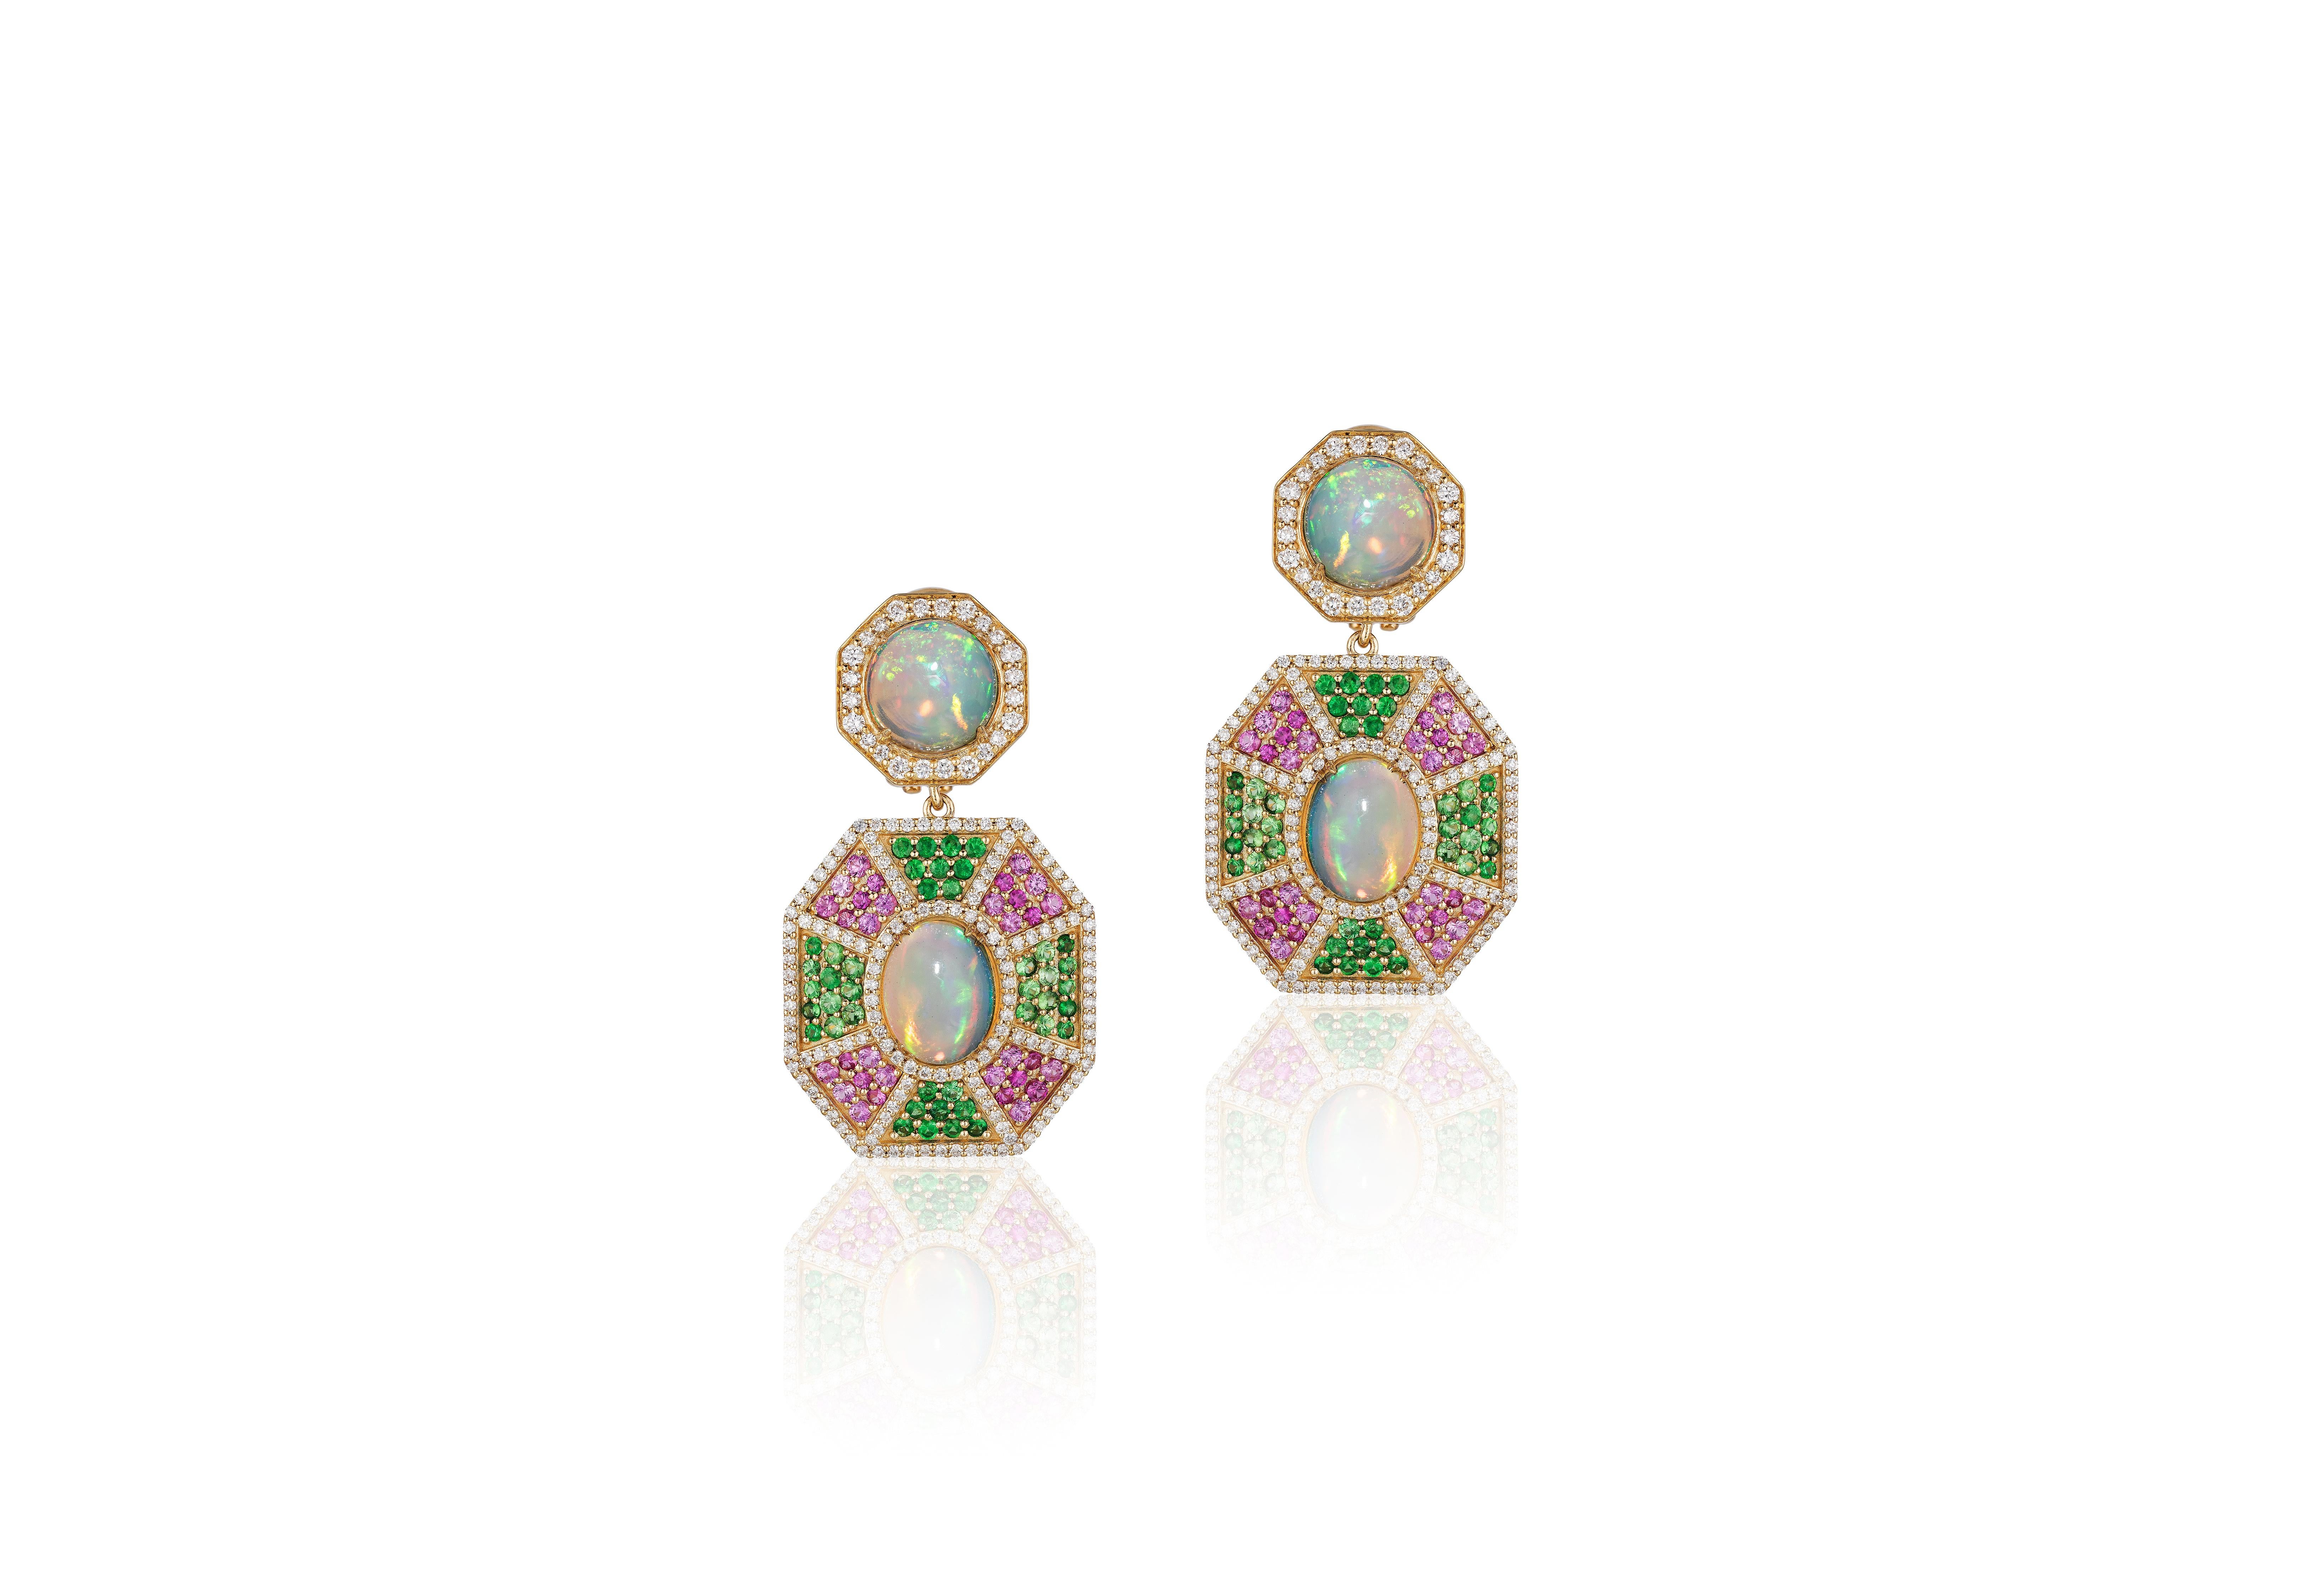 Opal Cab Earring With Tsavorite And Pink Sapphire And Diamonds in 18K Yellow Gold, from 'G-One' Collection

Gemstone Weight: Opal- 5.48 Carats
                                Tsavorite- 1.01 Carats
                                 Pink Sapphire-